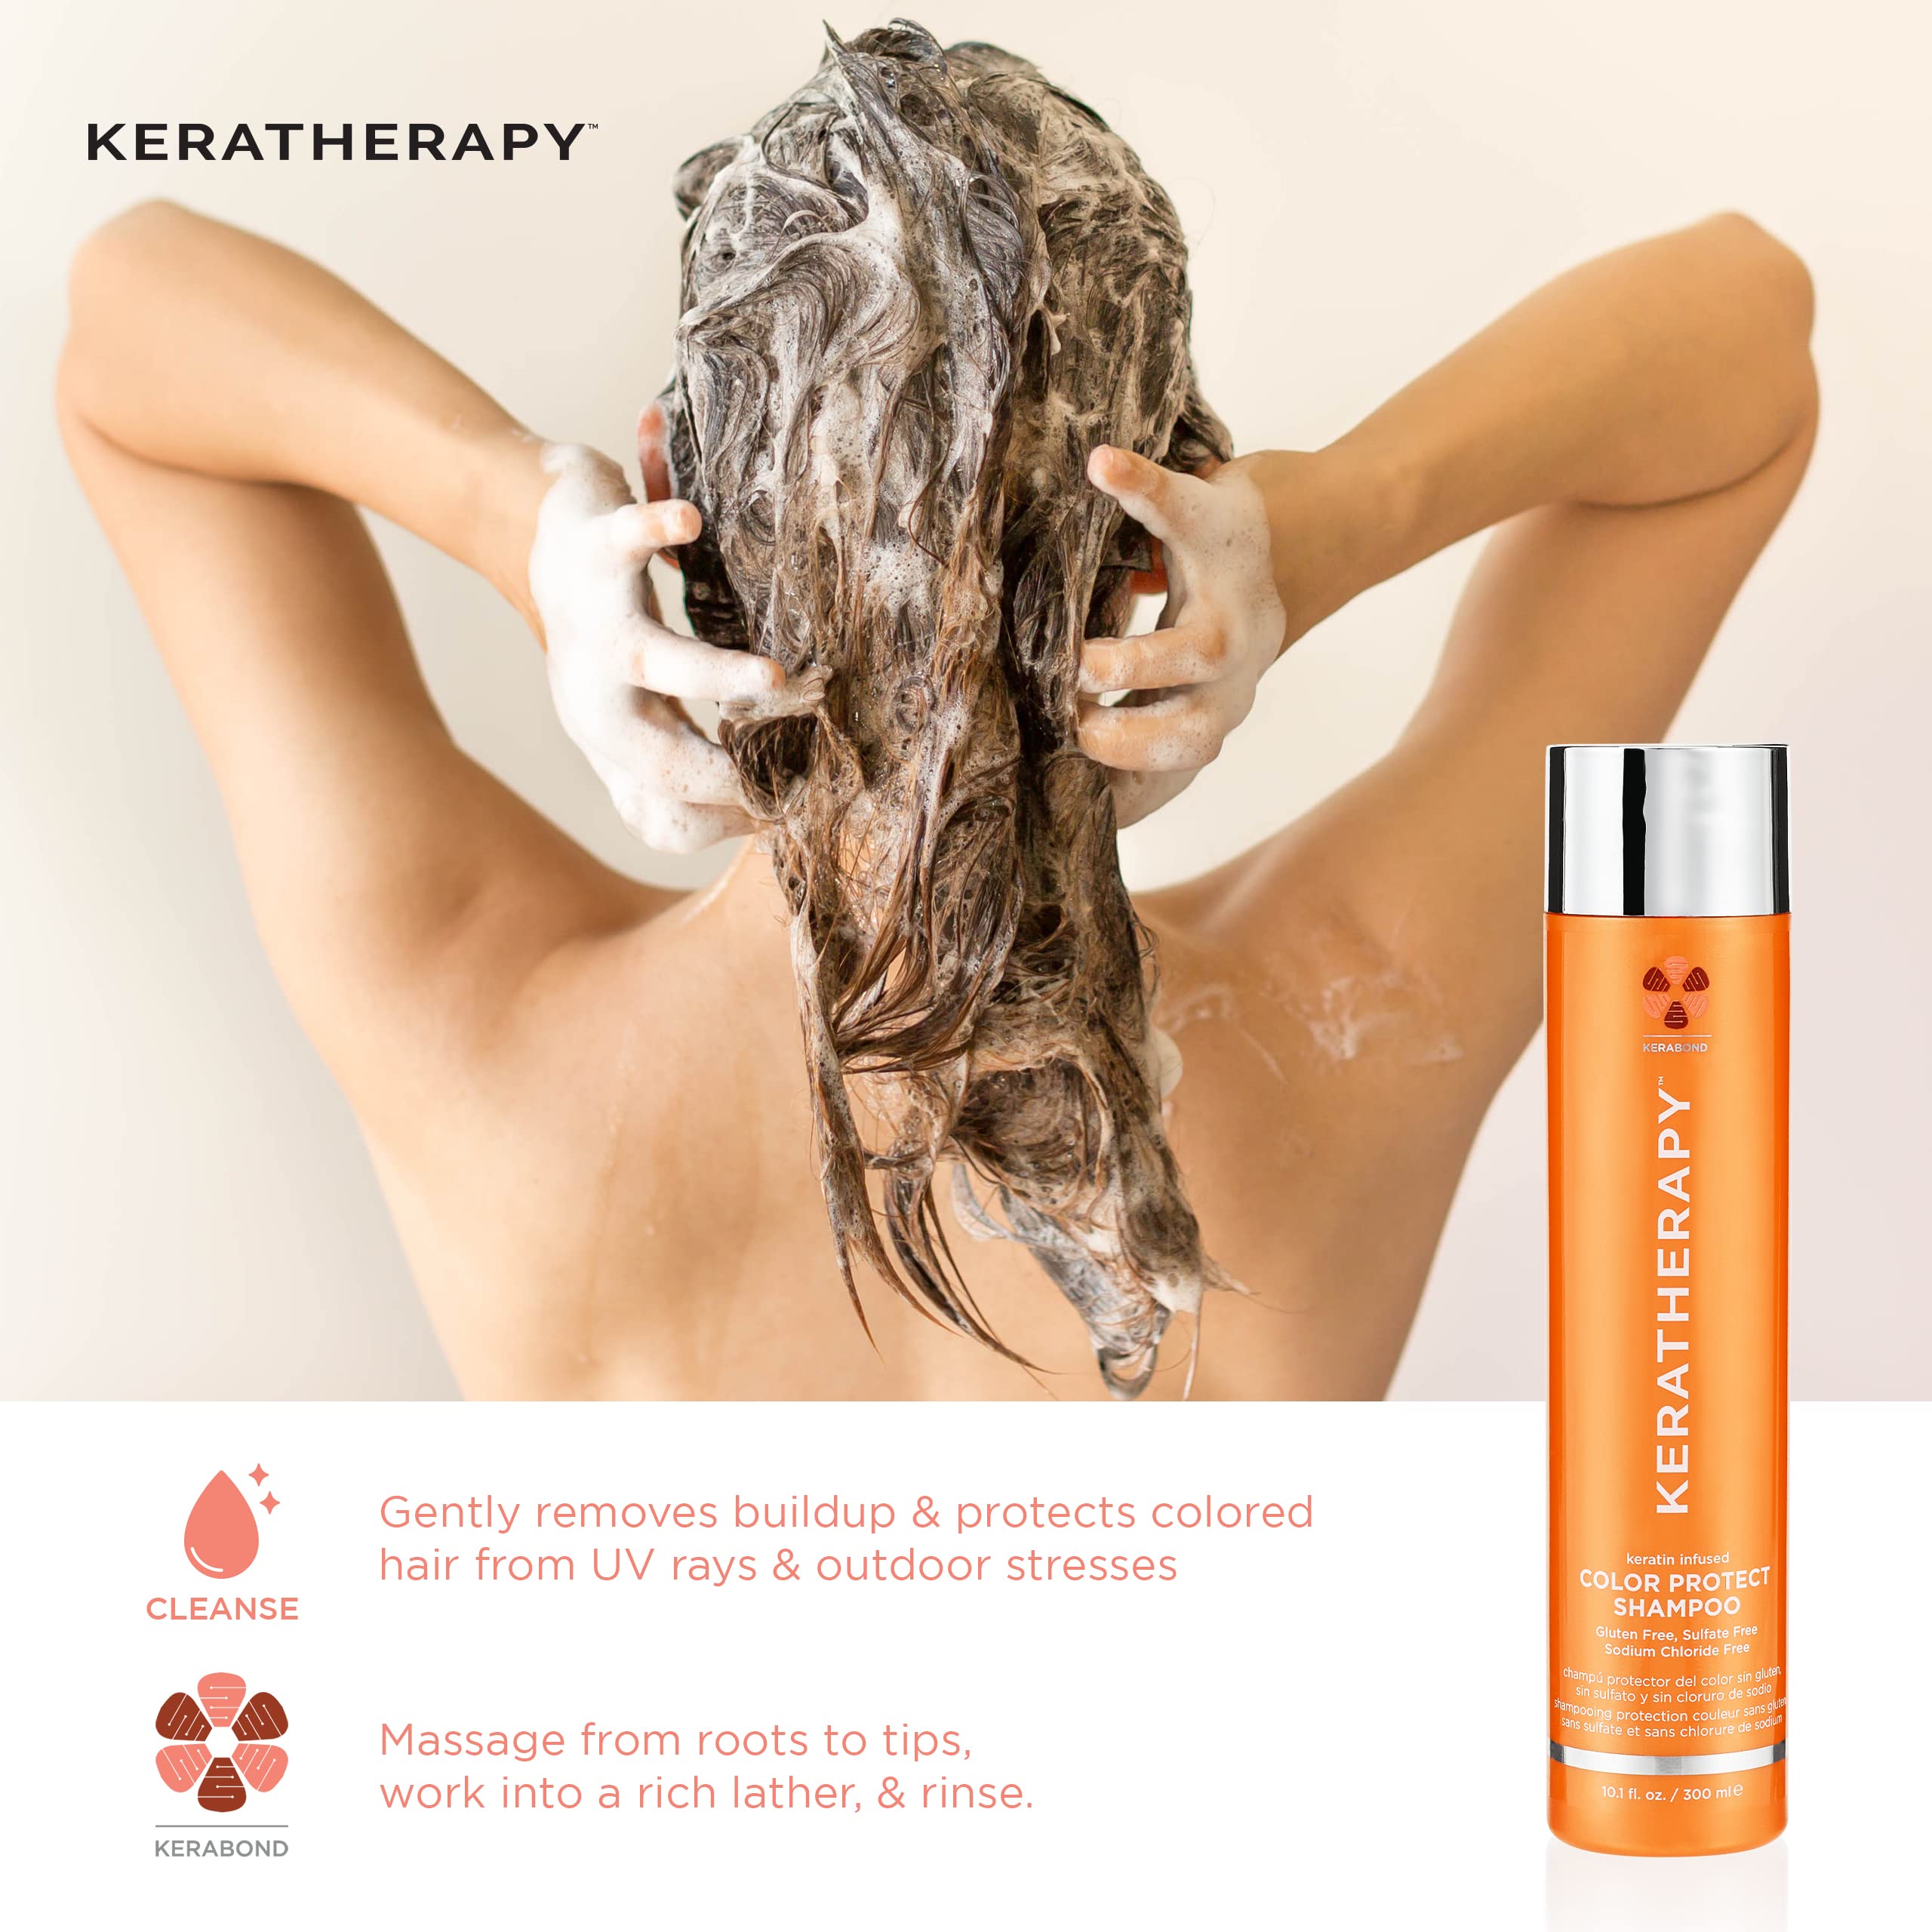 KERATHERAPY Keratin Infused Color Protect Shampoo, 33.8 fl. oz., 1000 ml - Gluten Free Color Protecting Shampoo for Color Treated Hair with Kerabond Technology, Red Raspberry Oil, Omega 3 & 6